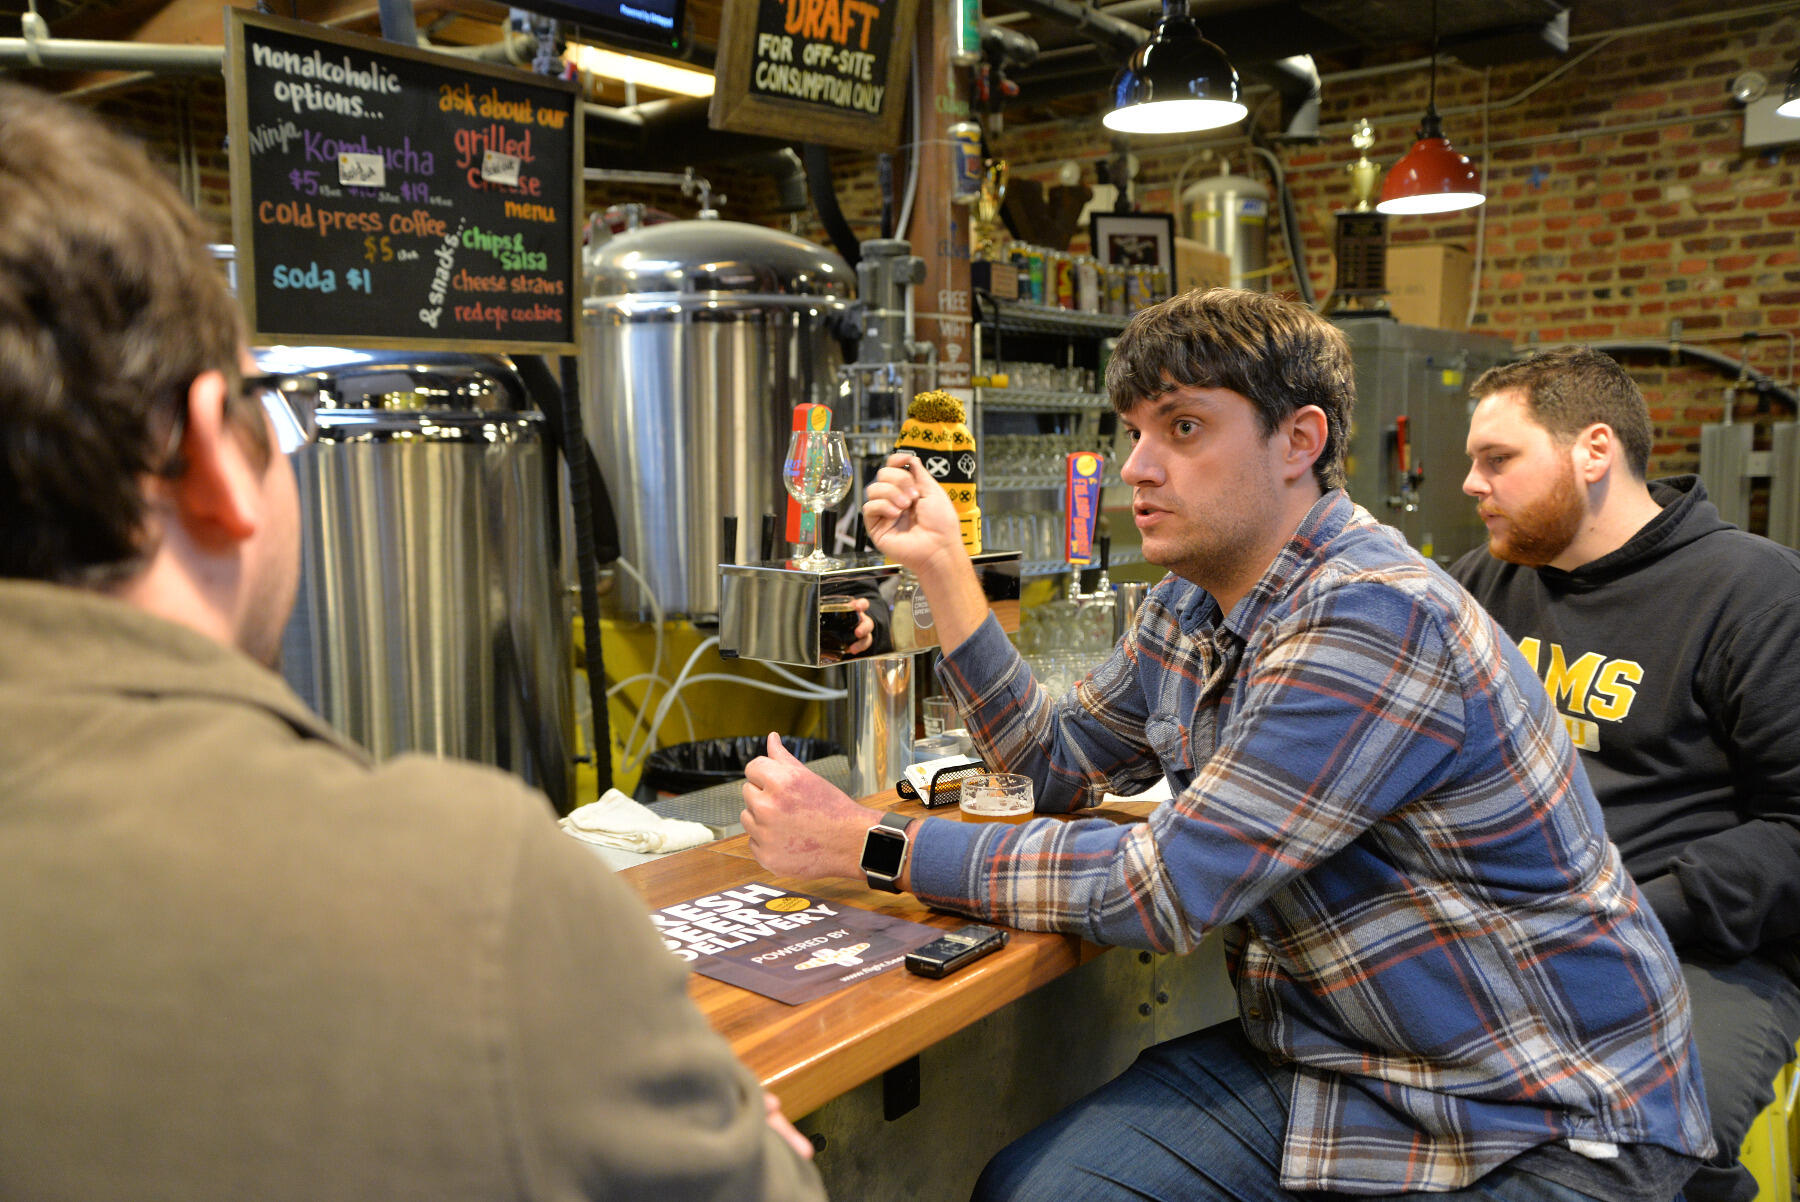 Flight co-founders Matthew Teachey and James Frederick interviewed customers in February at Triple Flight Brewing about craft beer delivery in order to better understand the needs of their target market.